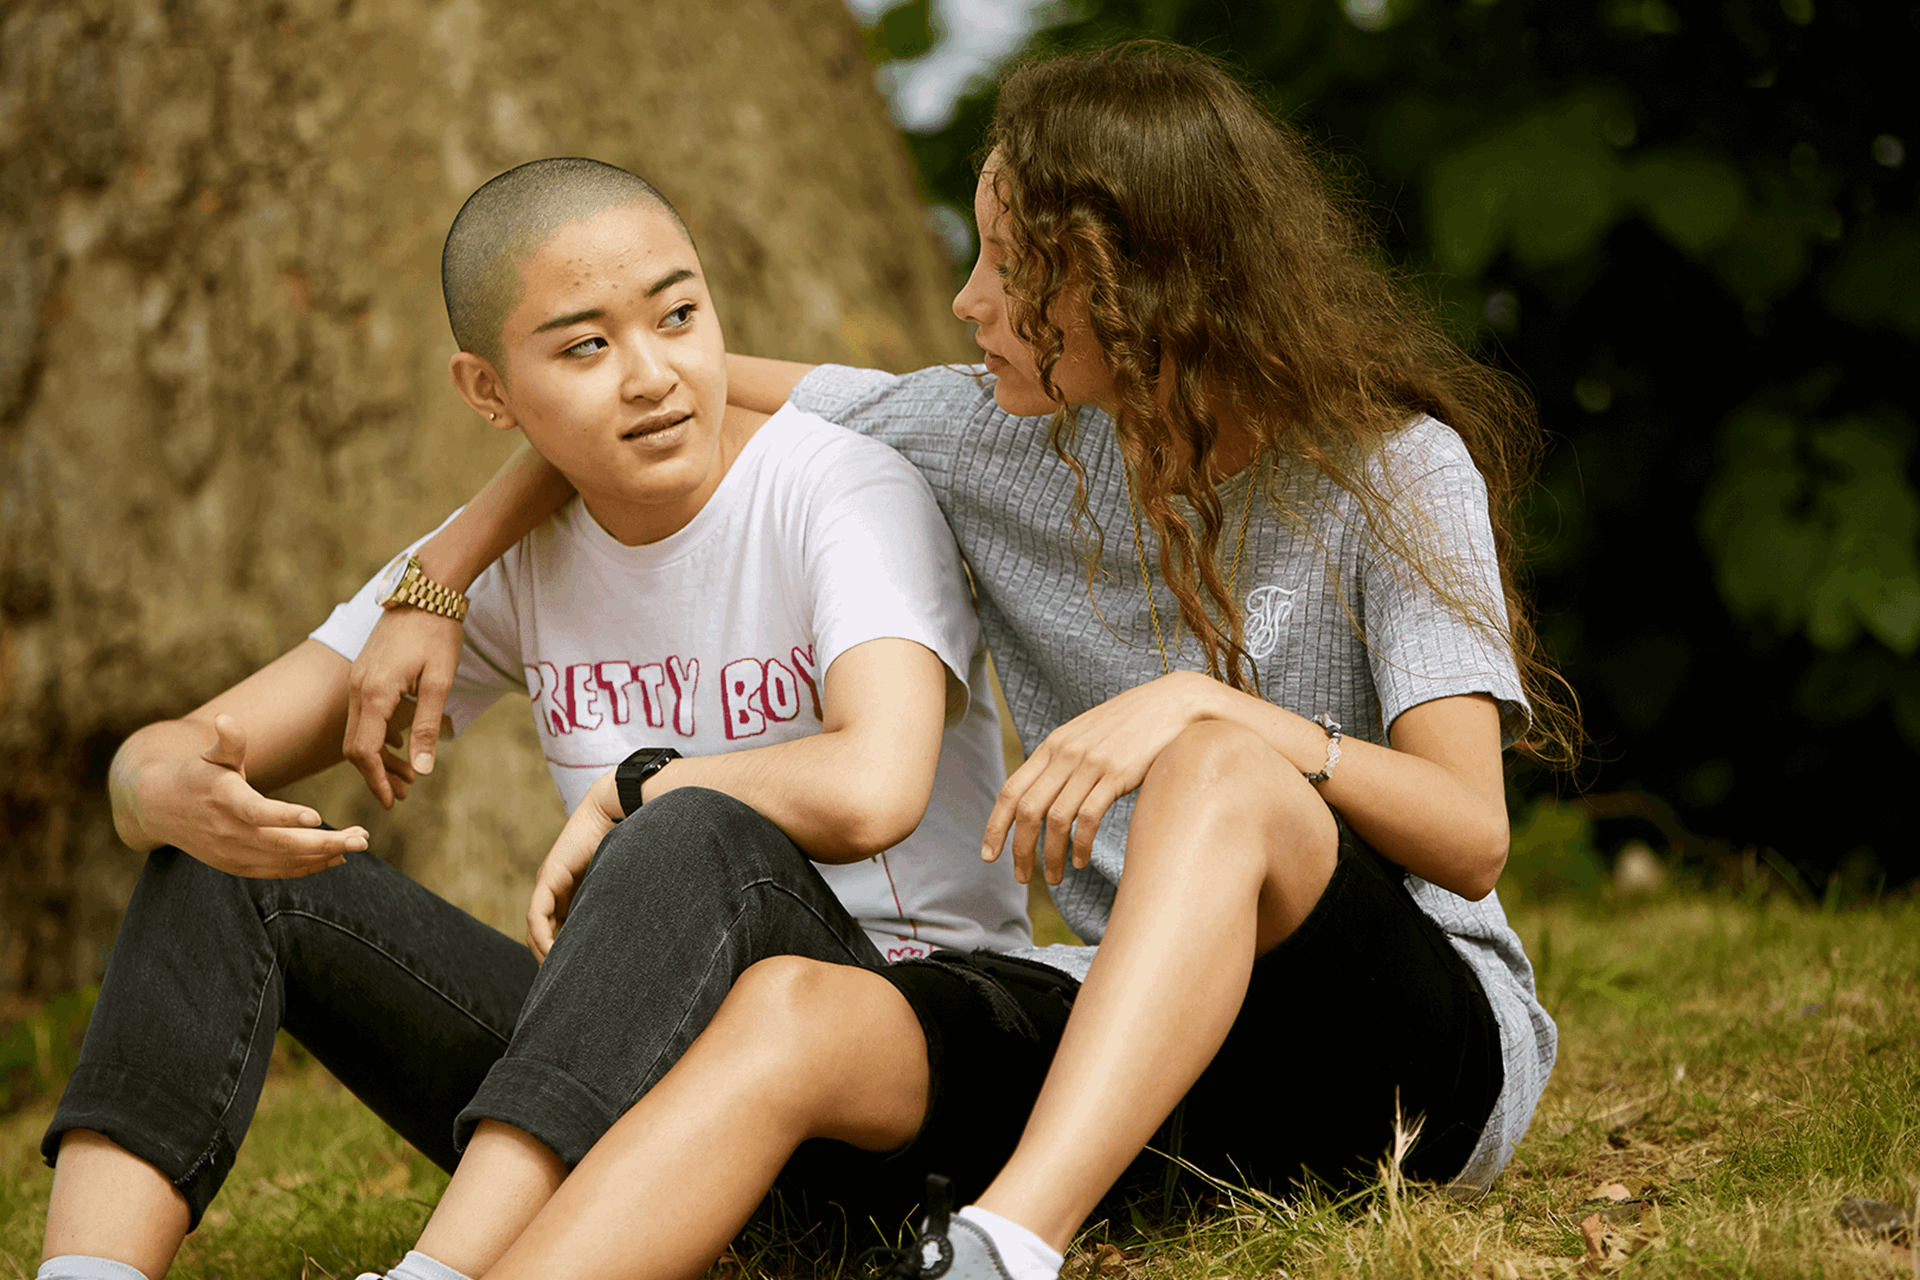 Two young people sitting in the grass together.